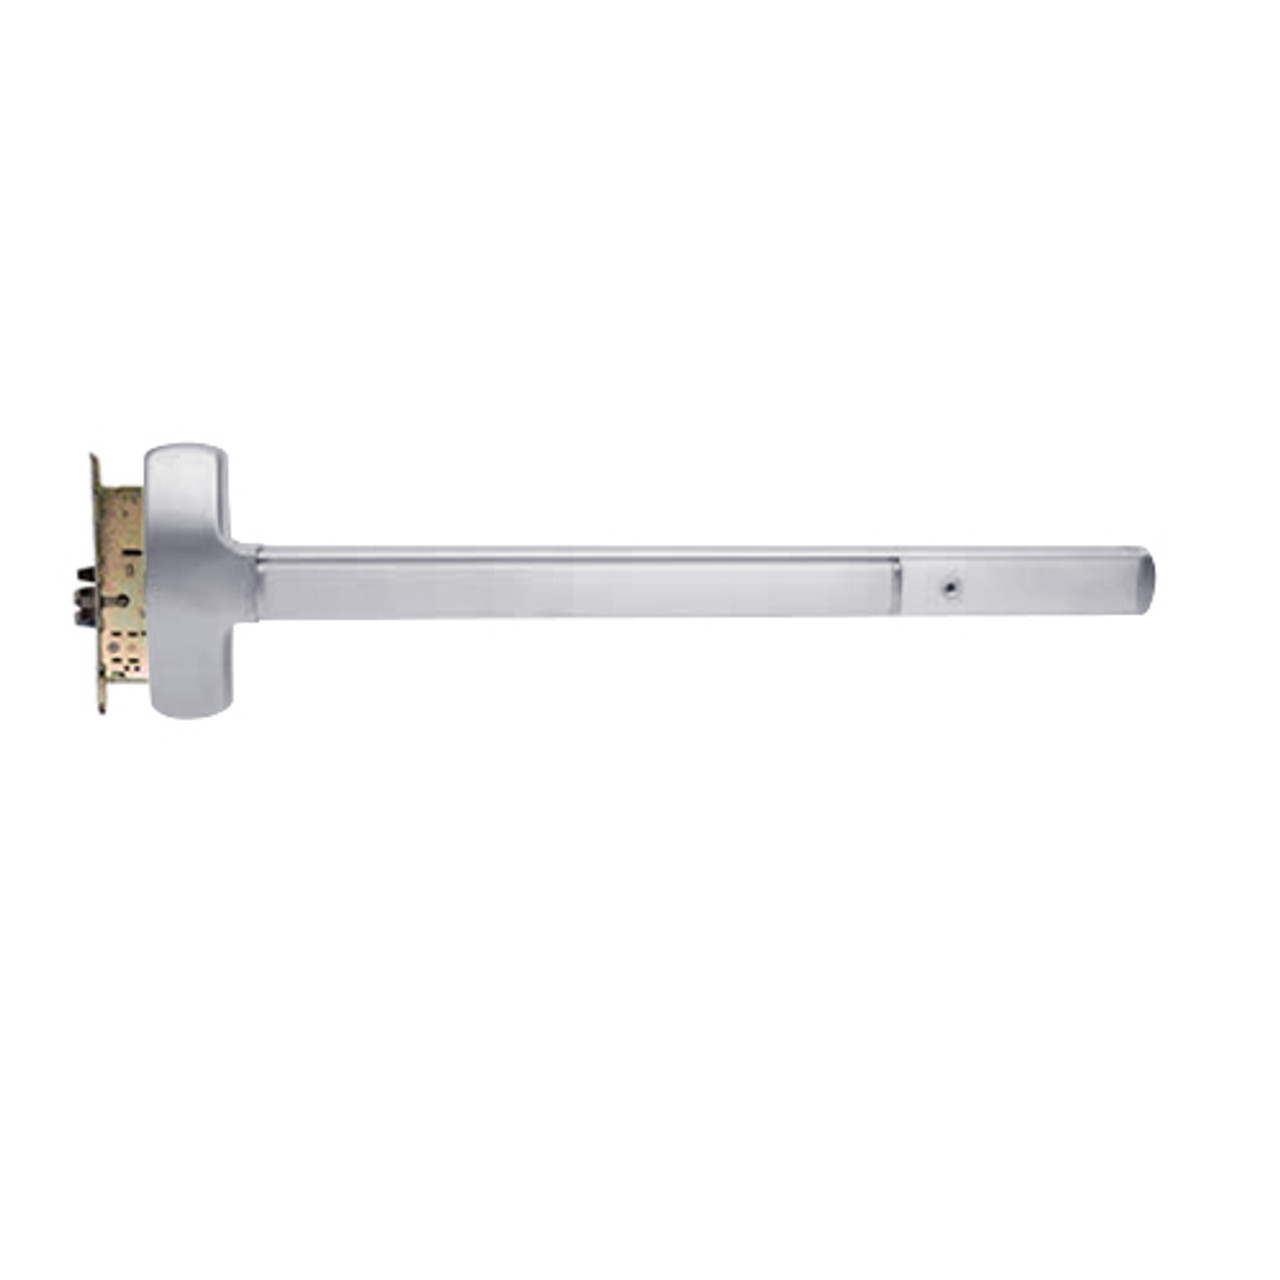 25-M-EO-US26-4-LHR Falcon Exit Device in Polished Chrome